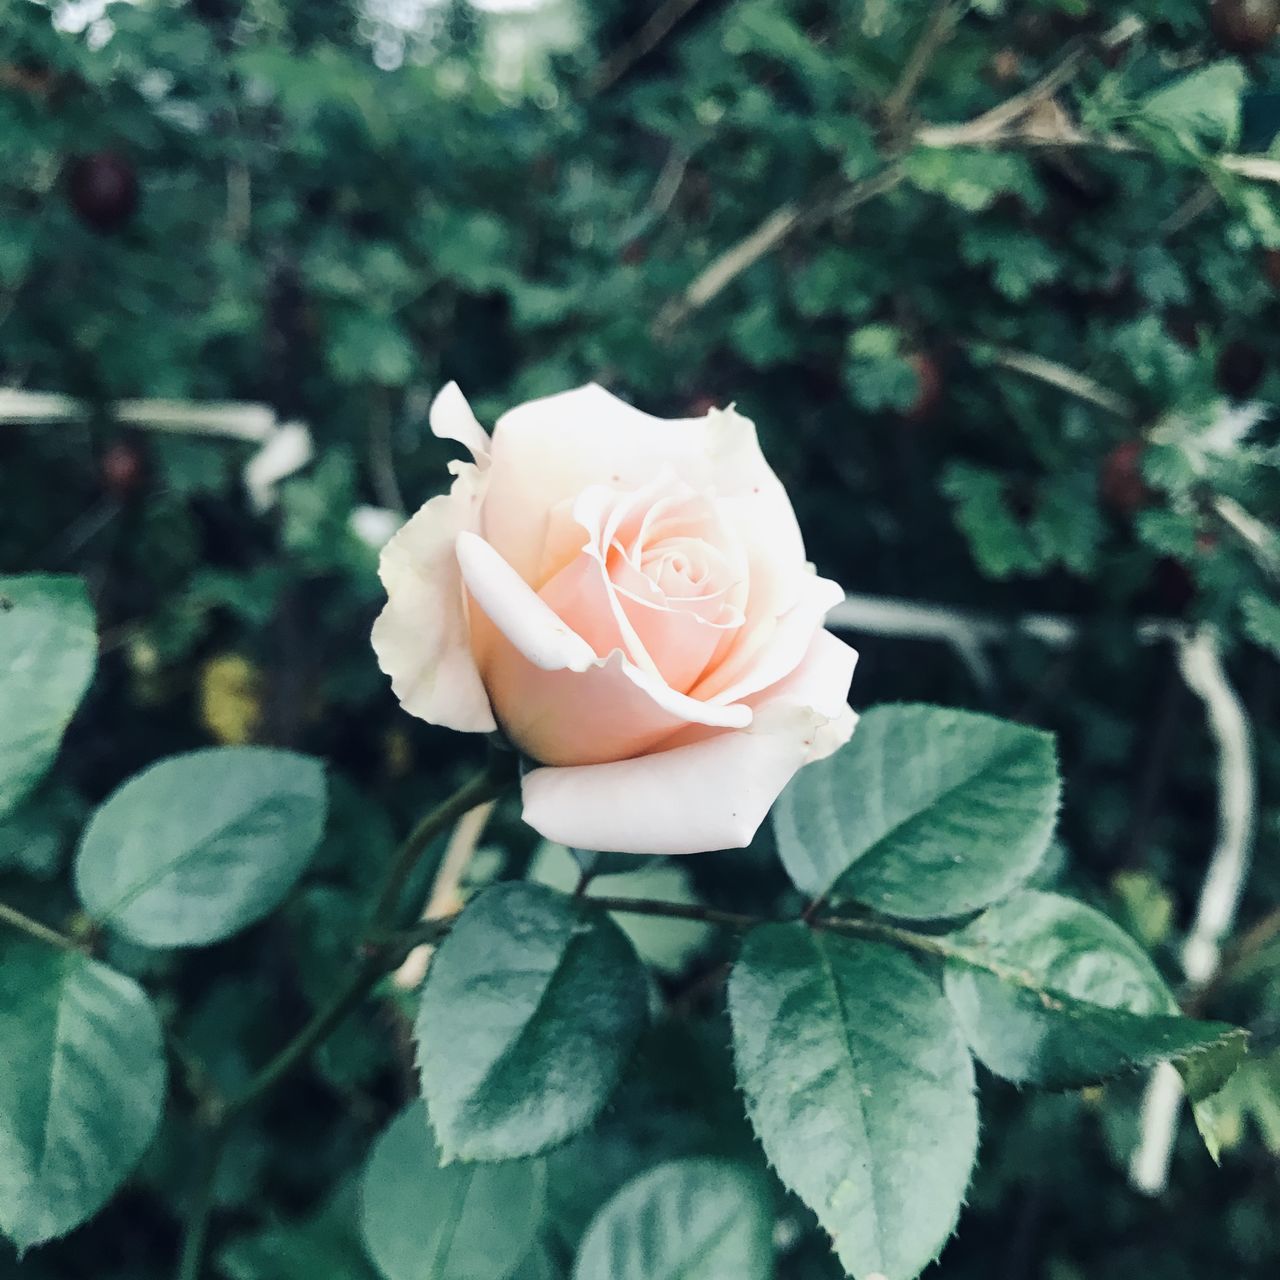 plant, flower, rose, flowering plant, beauty in nature, petal, leaf, freshness, plant part, nature, flower head, green, garden roses, inflorescence, fragility, close-up, growth, focus on foreground, no people, outdoors, rose - flower, day, pink, white, springtime